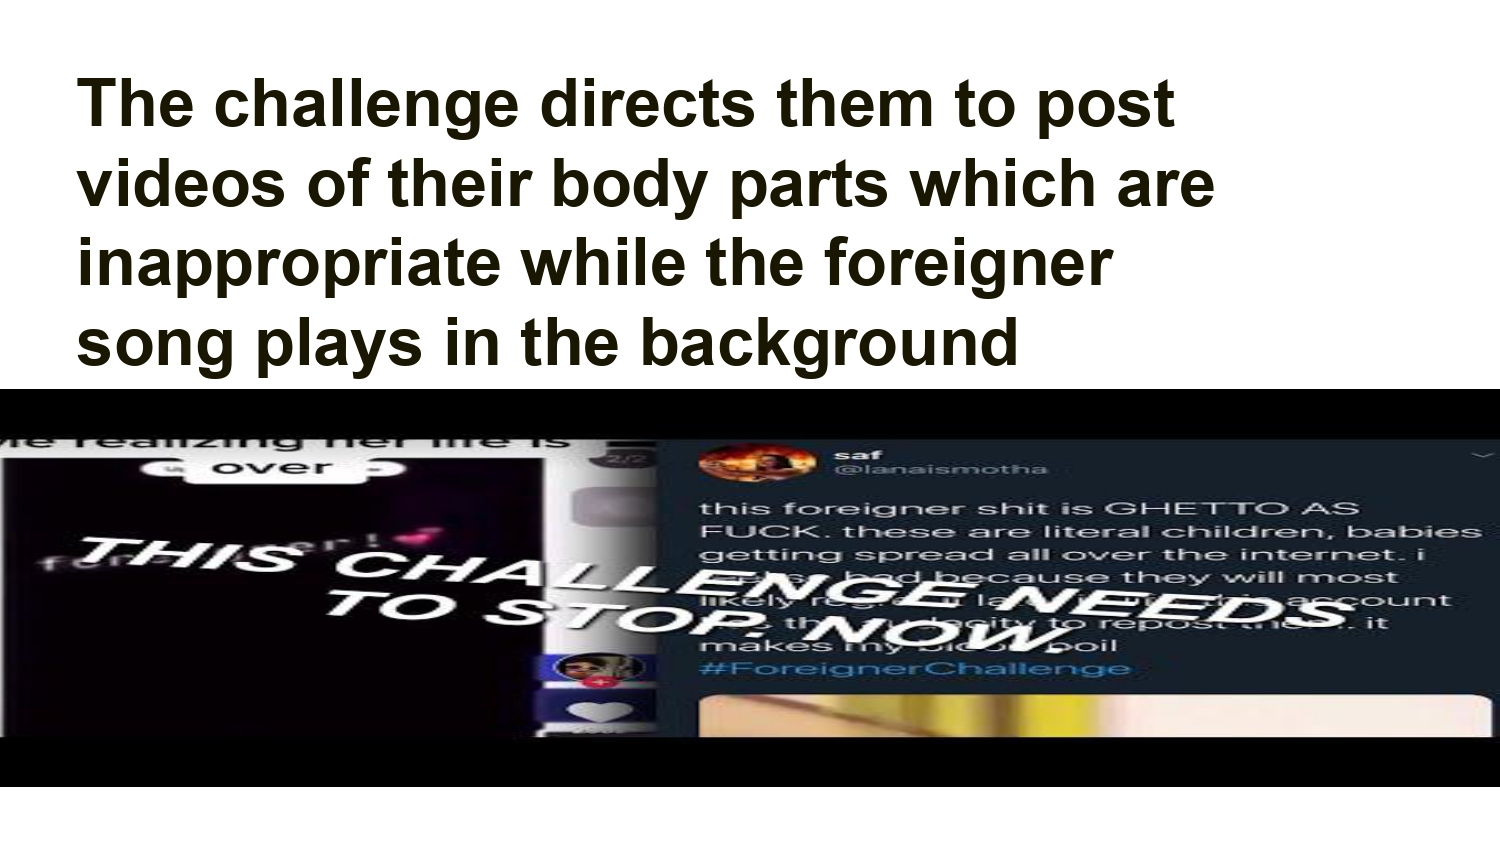 Foreigner Challenge: The Latest Social Media Craze That's Taking Over Twitter - wide 5